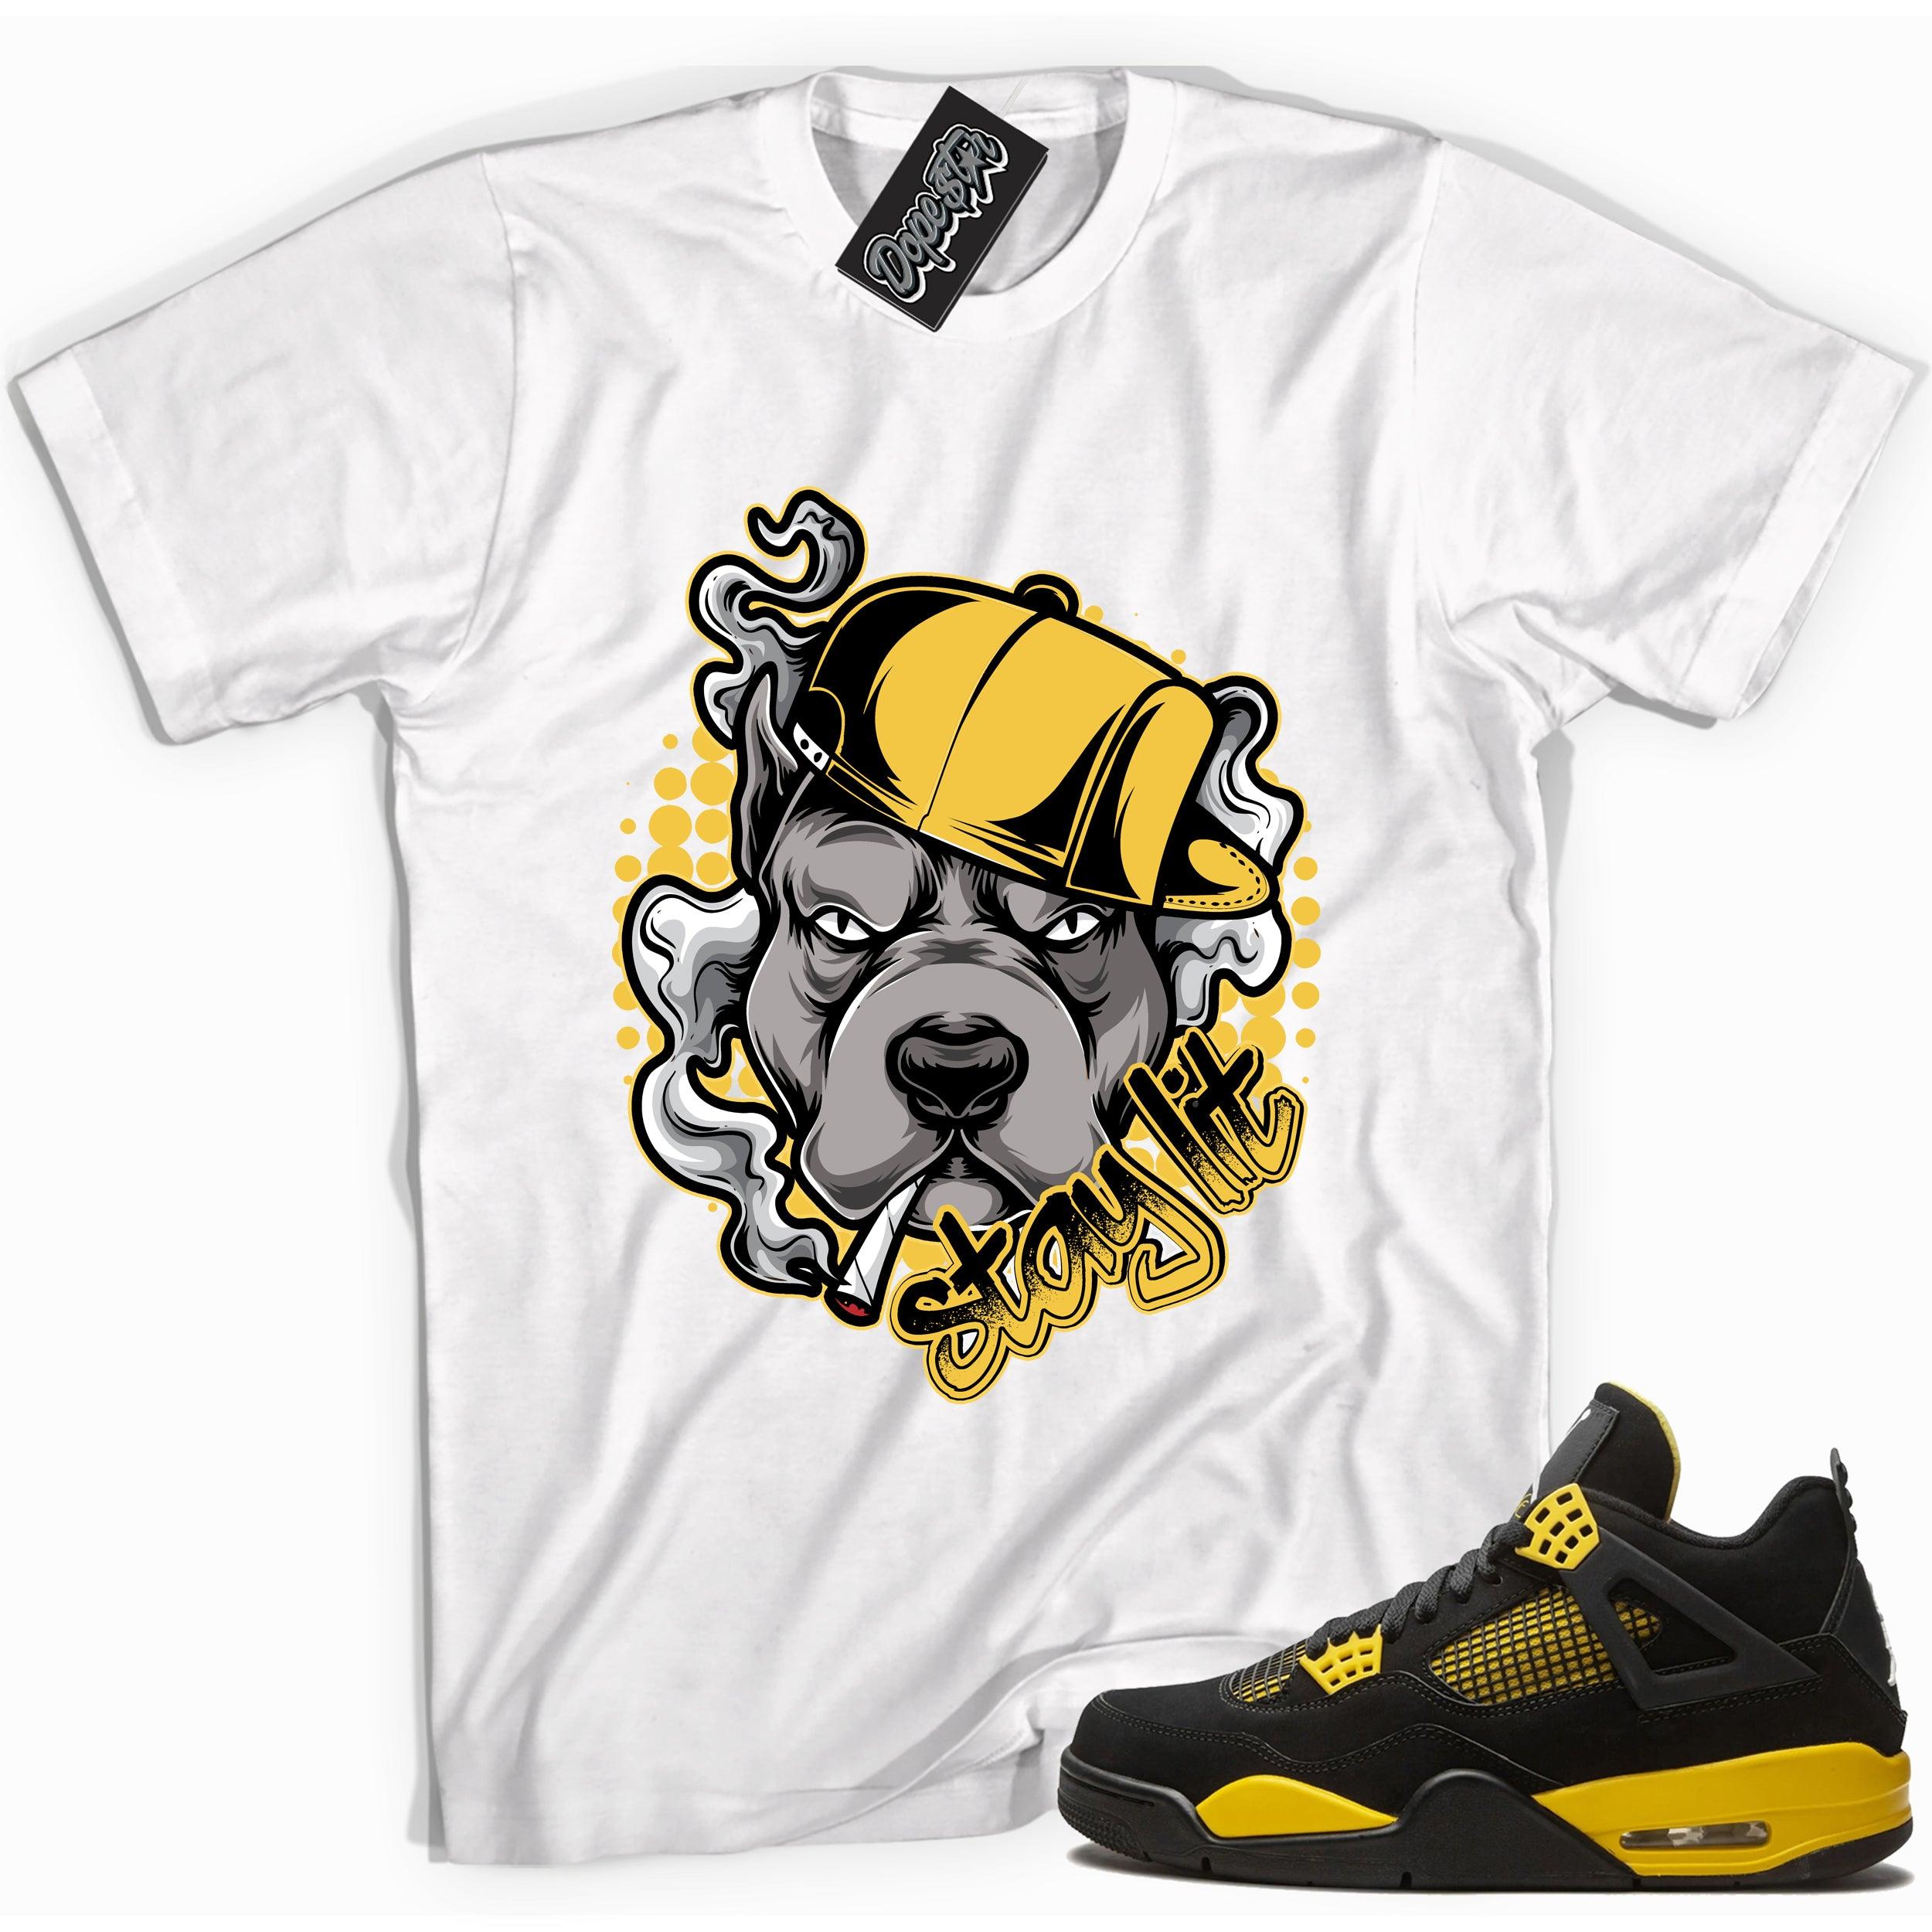 Cool white  graphic tee with 'stay lit' print, that perfectly matches Air Jordan 4 Thunder sneakers